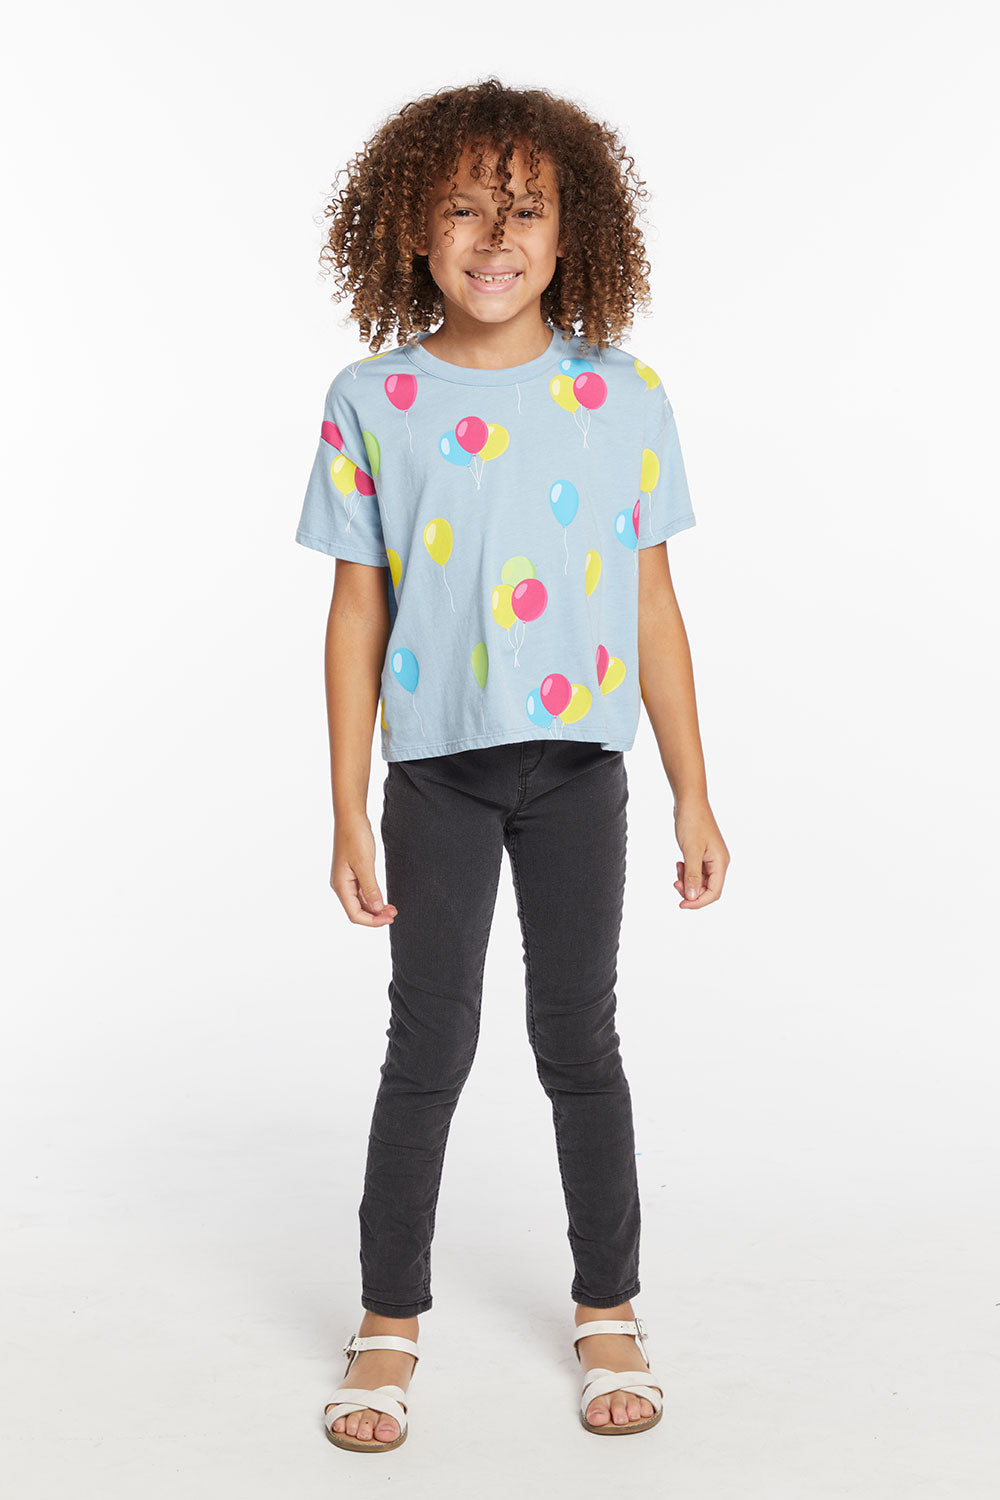 Party Balloons Girls Tee GIRLS chaserbrand